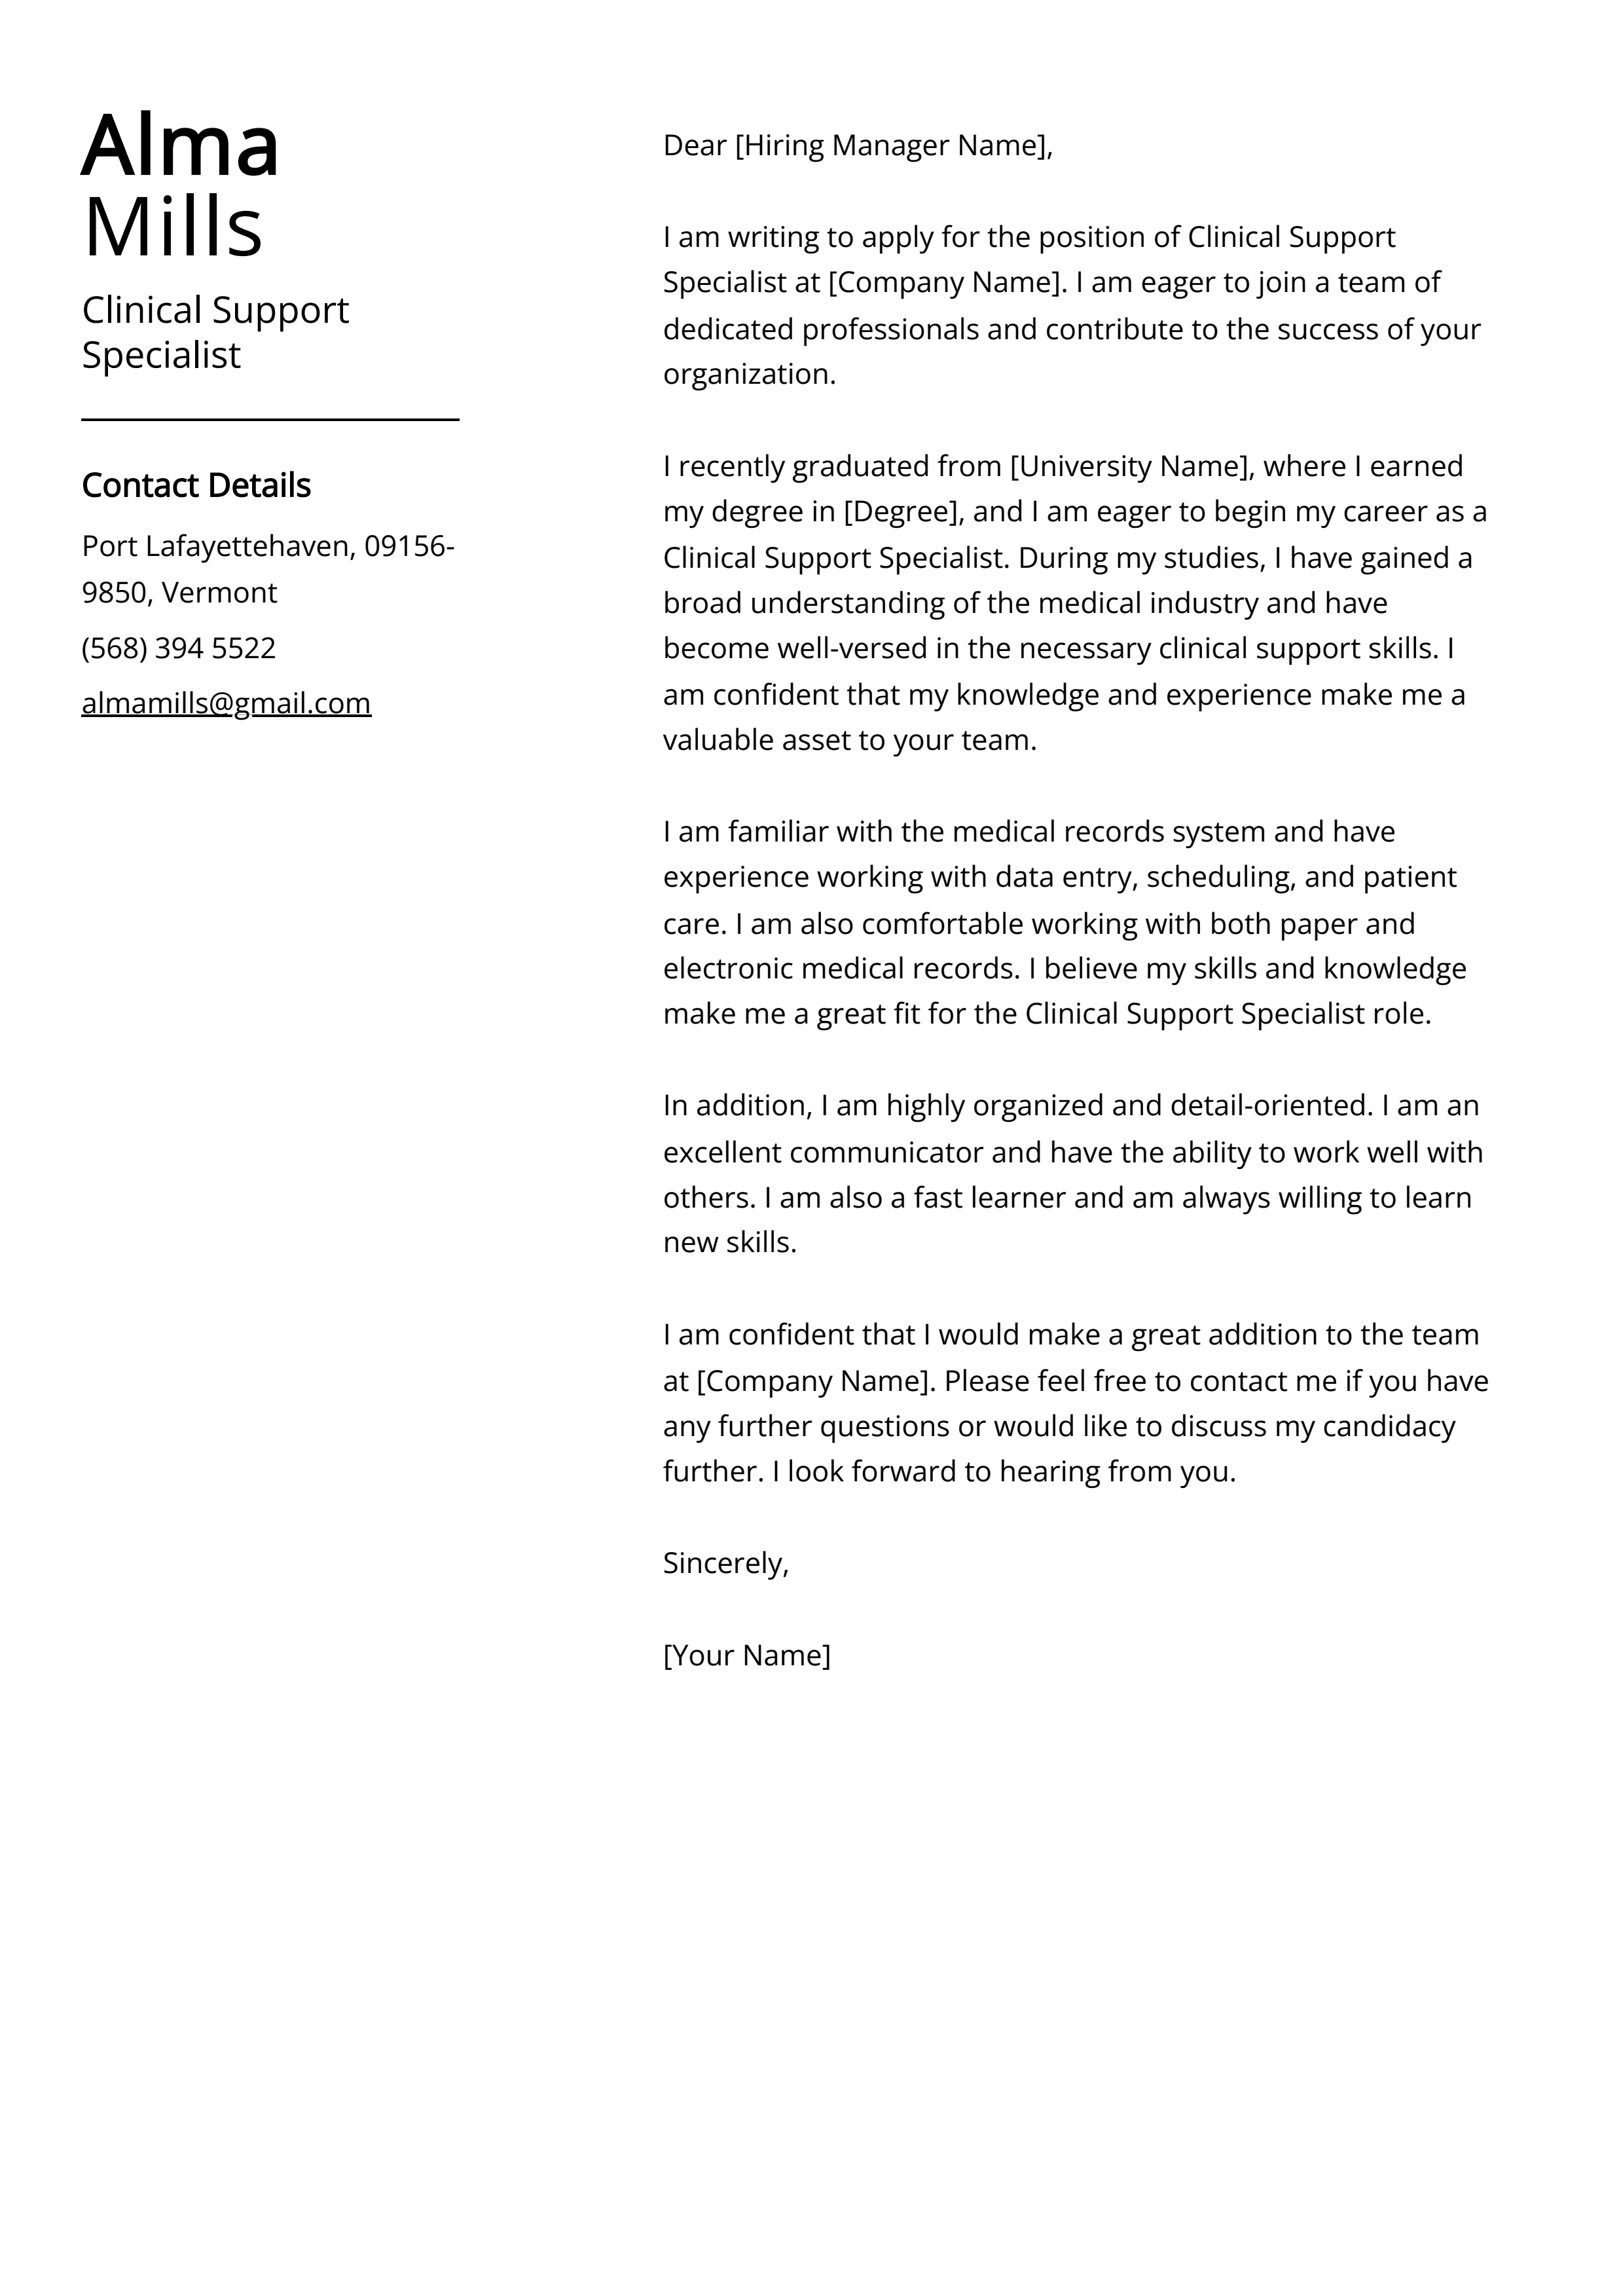 Clinical Support Specialist Cover Letter Example